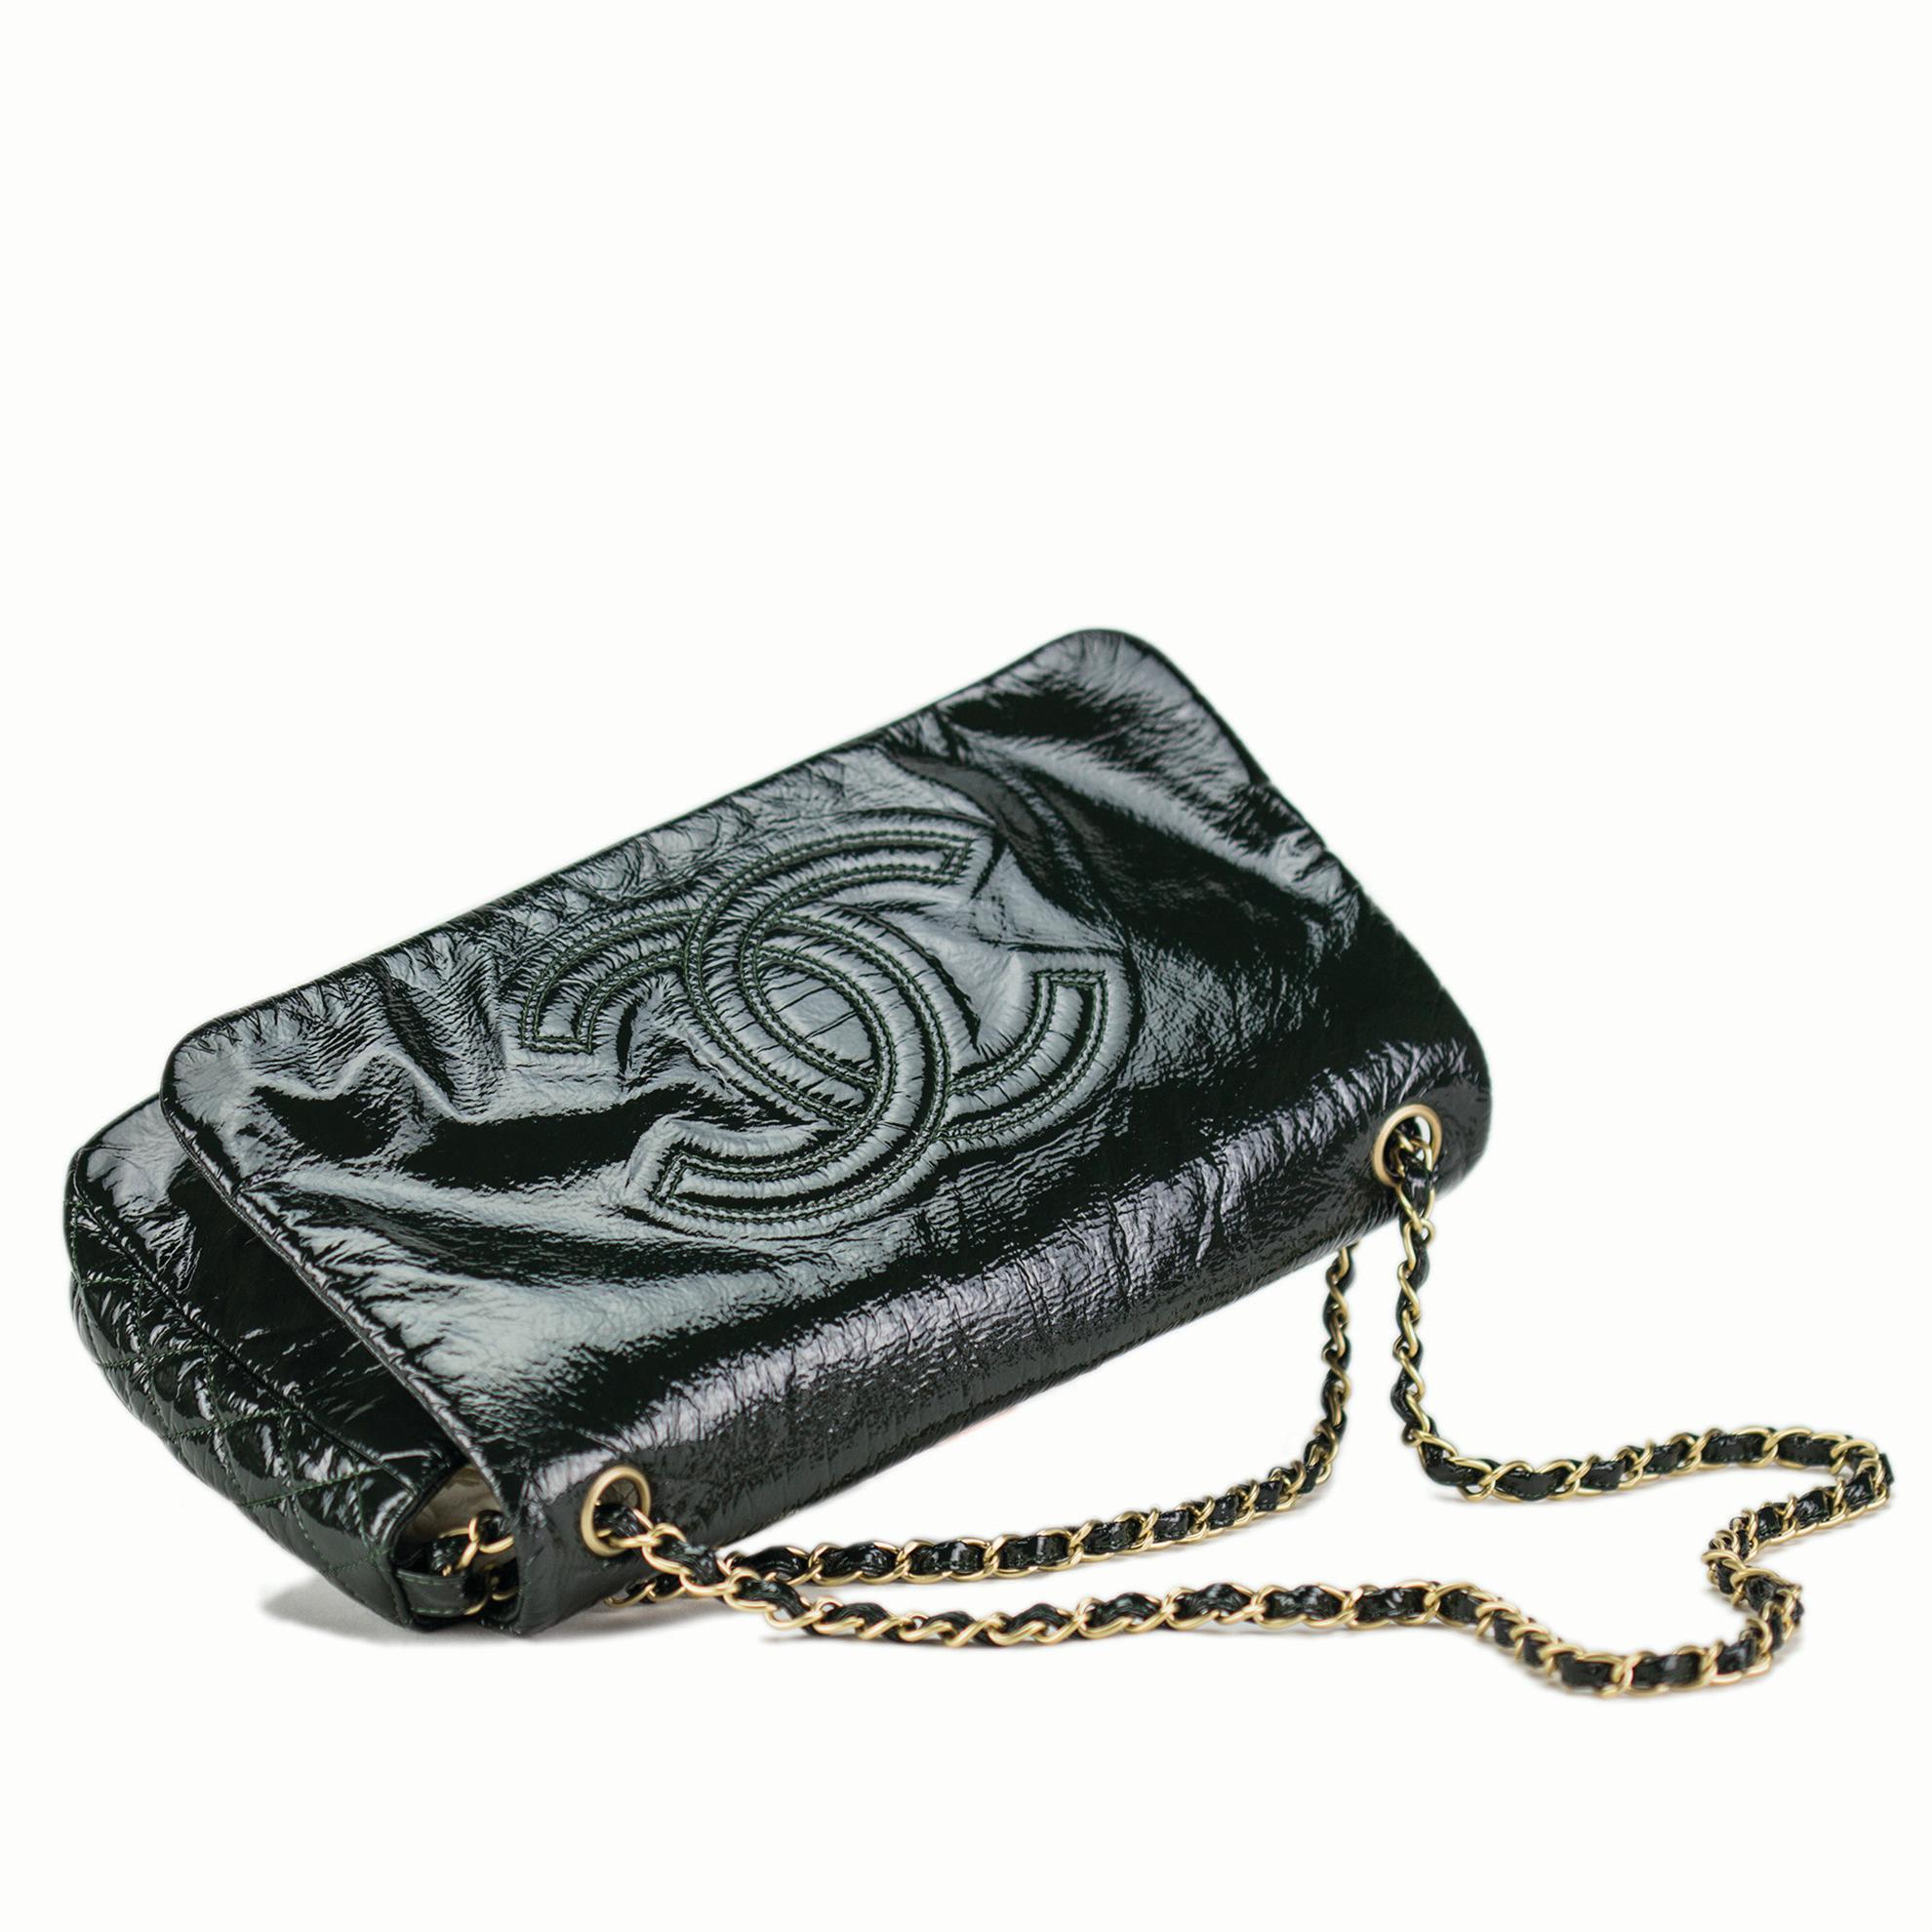 Chanel Forest Green Leather Medium Quilted CC Classic Flap Bag

Gold hardware
Green patent flap with magnetic snap closure
Interlocking CC logo at front of bag
Quilted detailing around bottom and side of bag
Classic interwoven chain strap
Beige